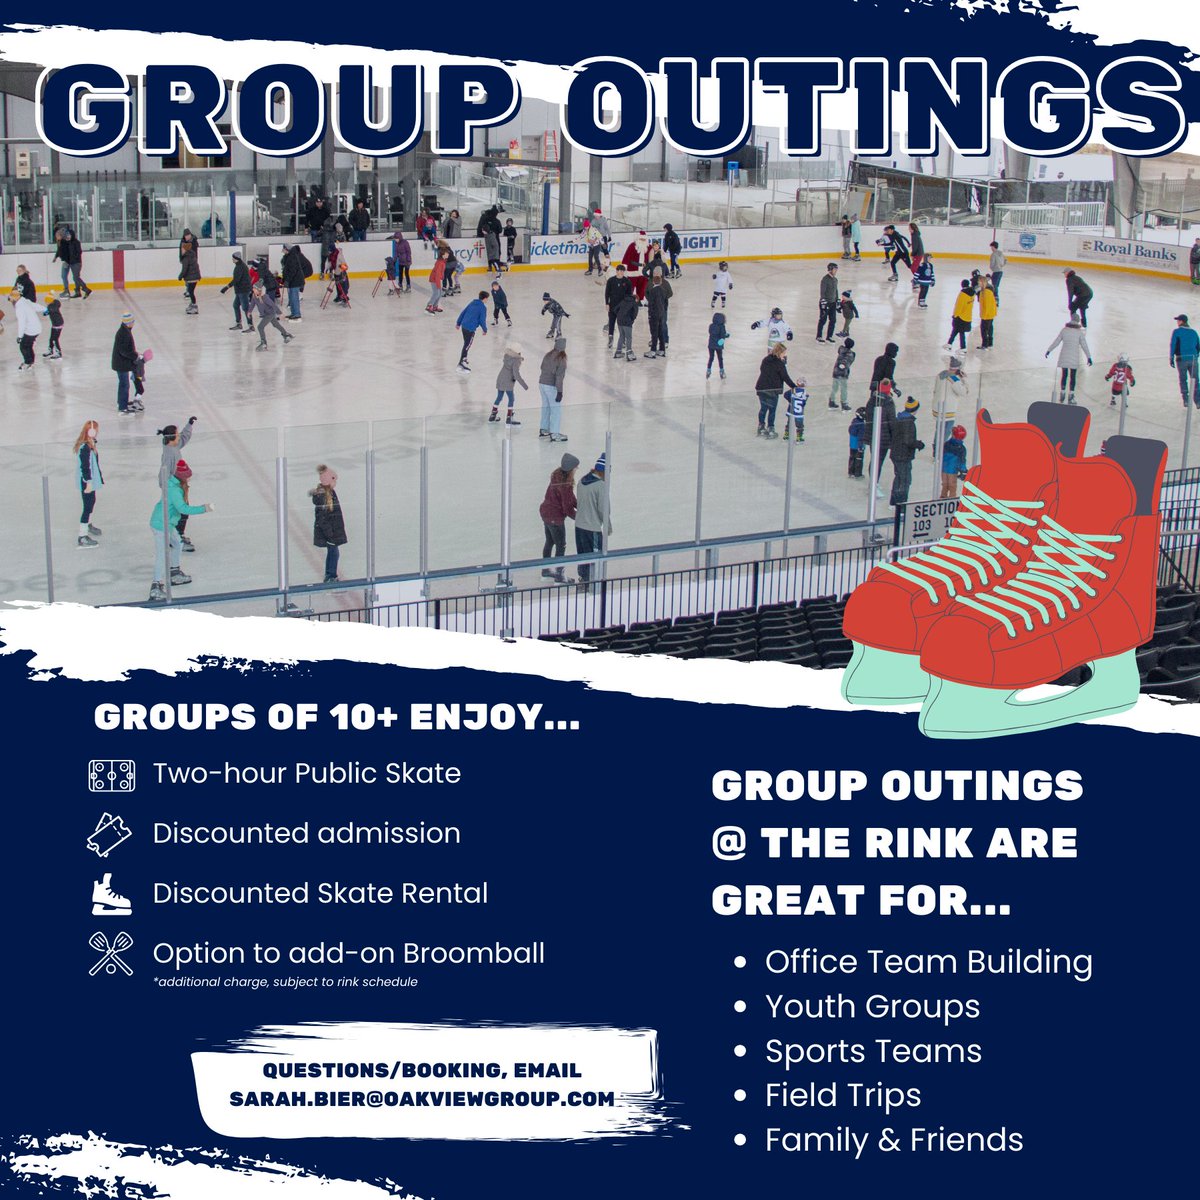 Do you run a daycare? Summer camp? Or maybe just looking for a fun outing for your office this spring? Schedule a group outing on the ice at Centene Community Ice Center! Learn more: centenecommunityicecenter.com/parties-rental…